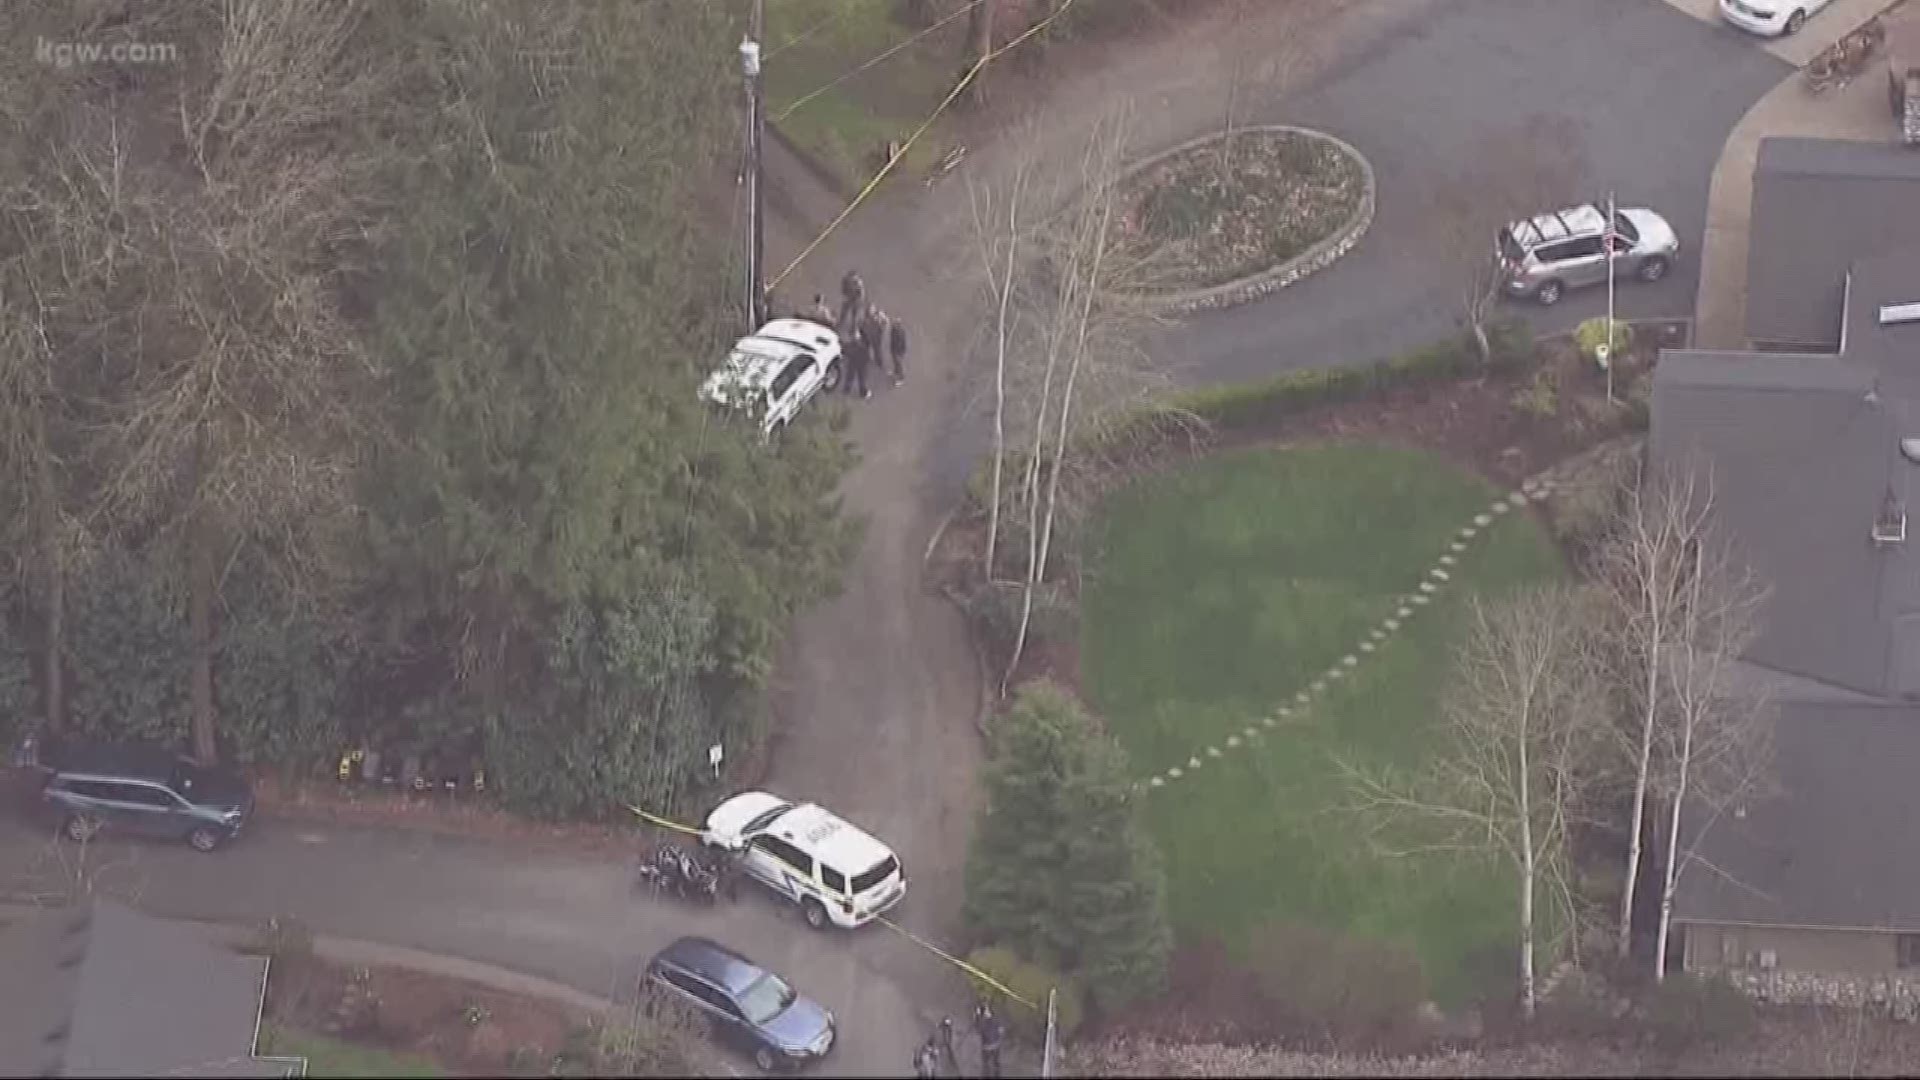 Two people were killed in an apparent murder-suicide in West Linn.